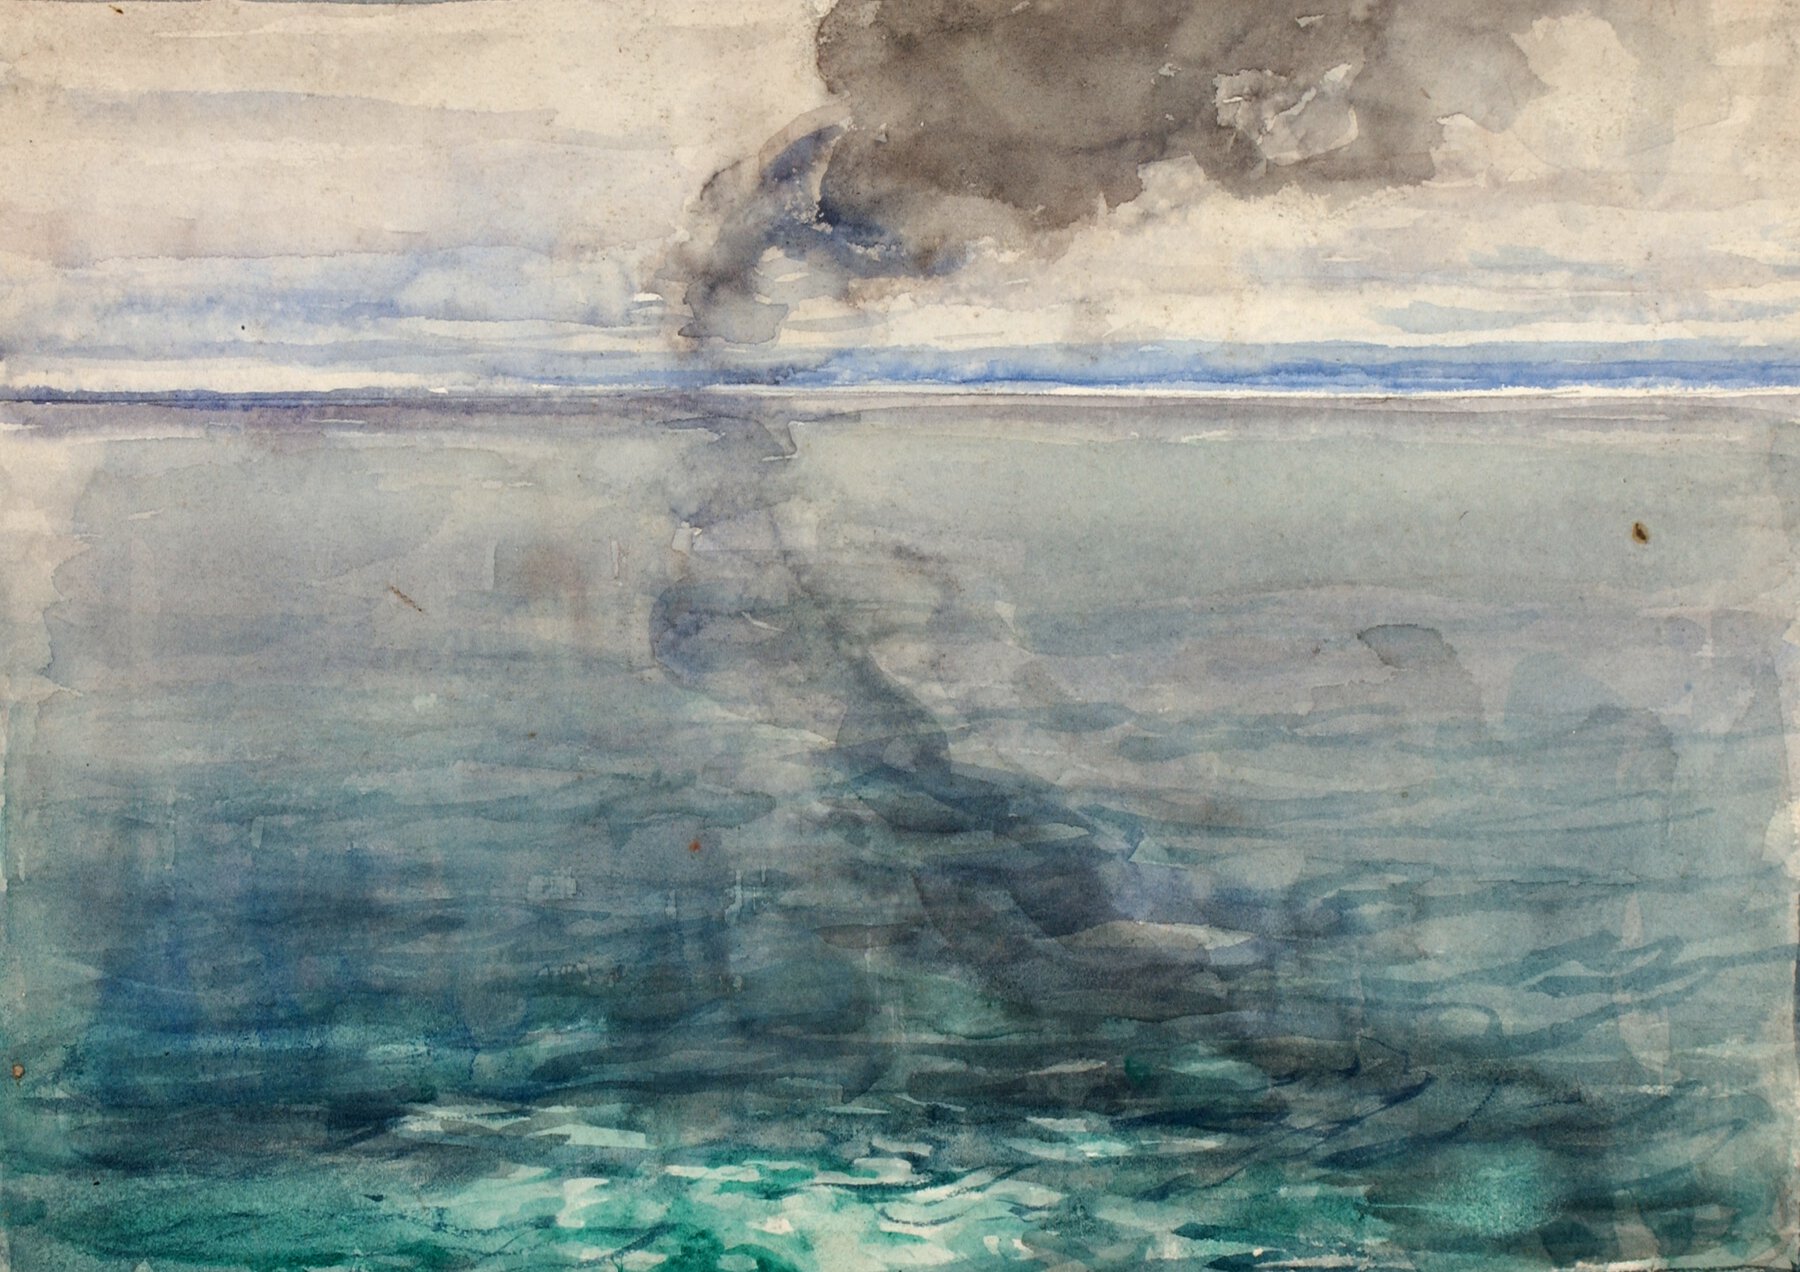 Scene of ocean water with clouds and plume of dark smoke rising in background.